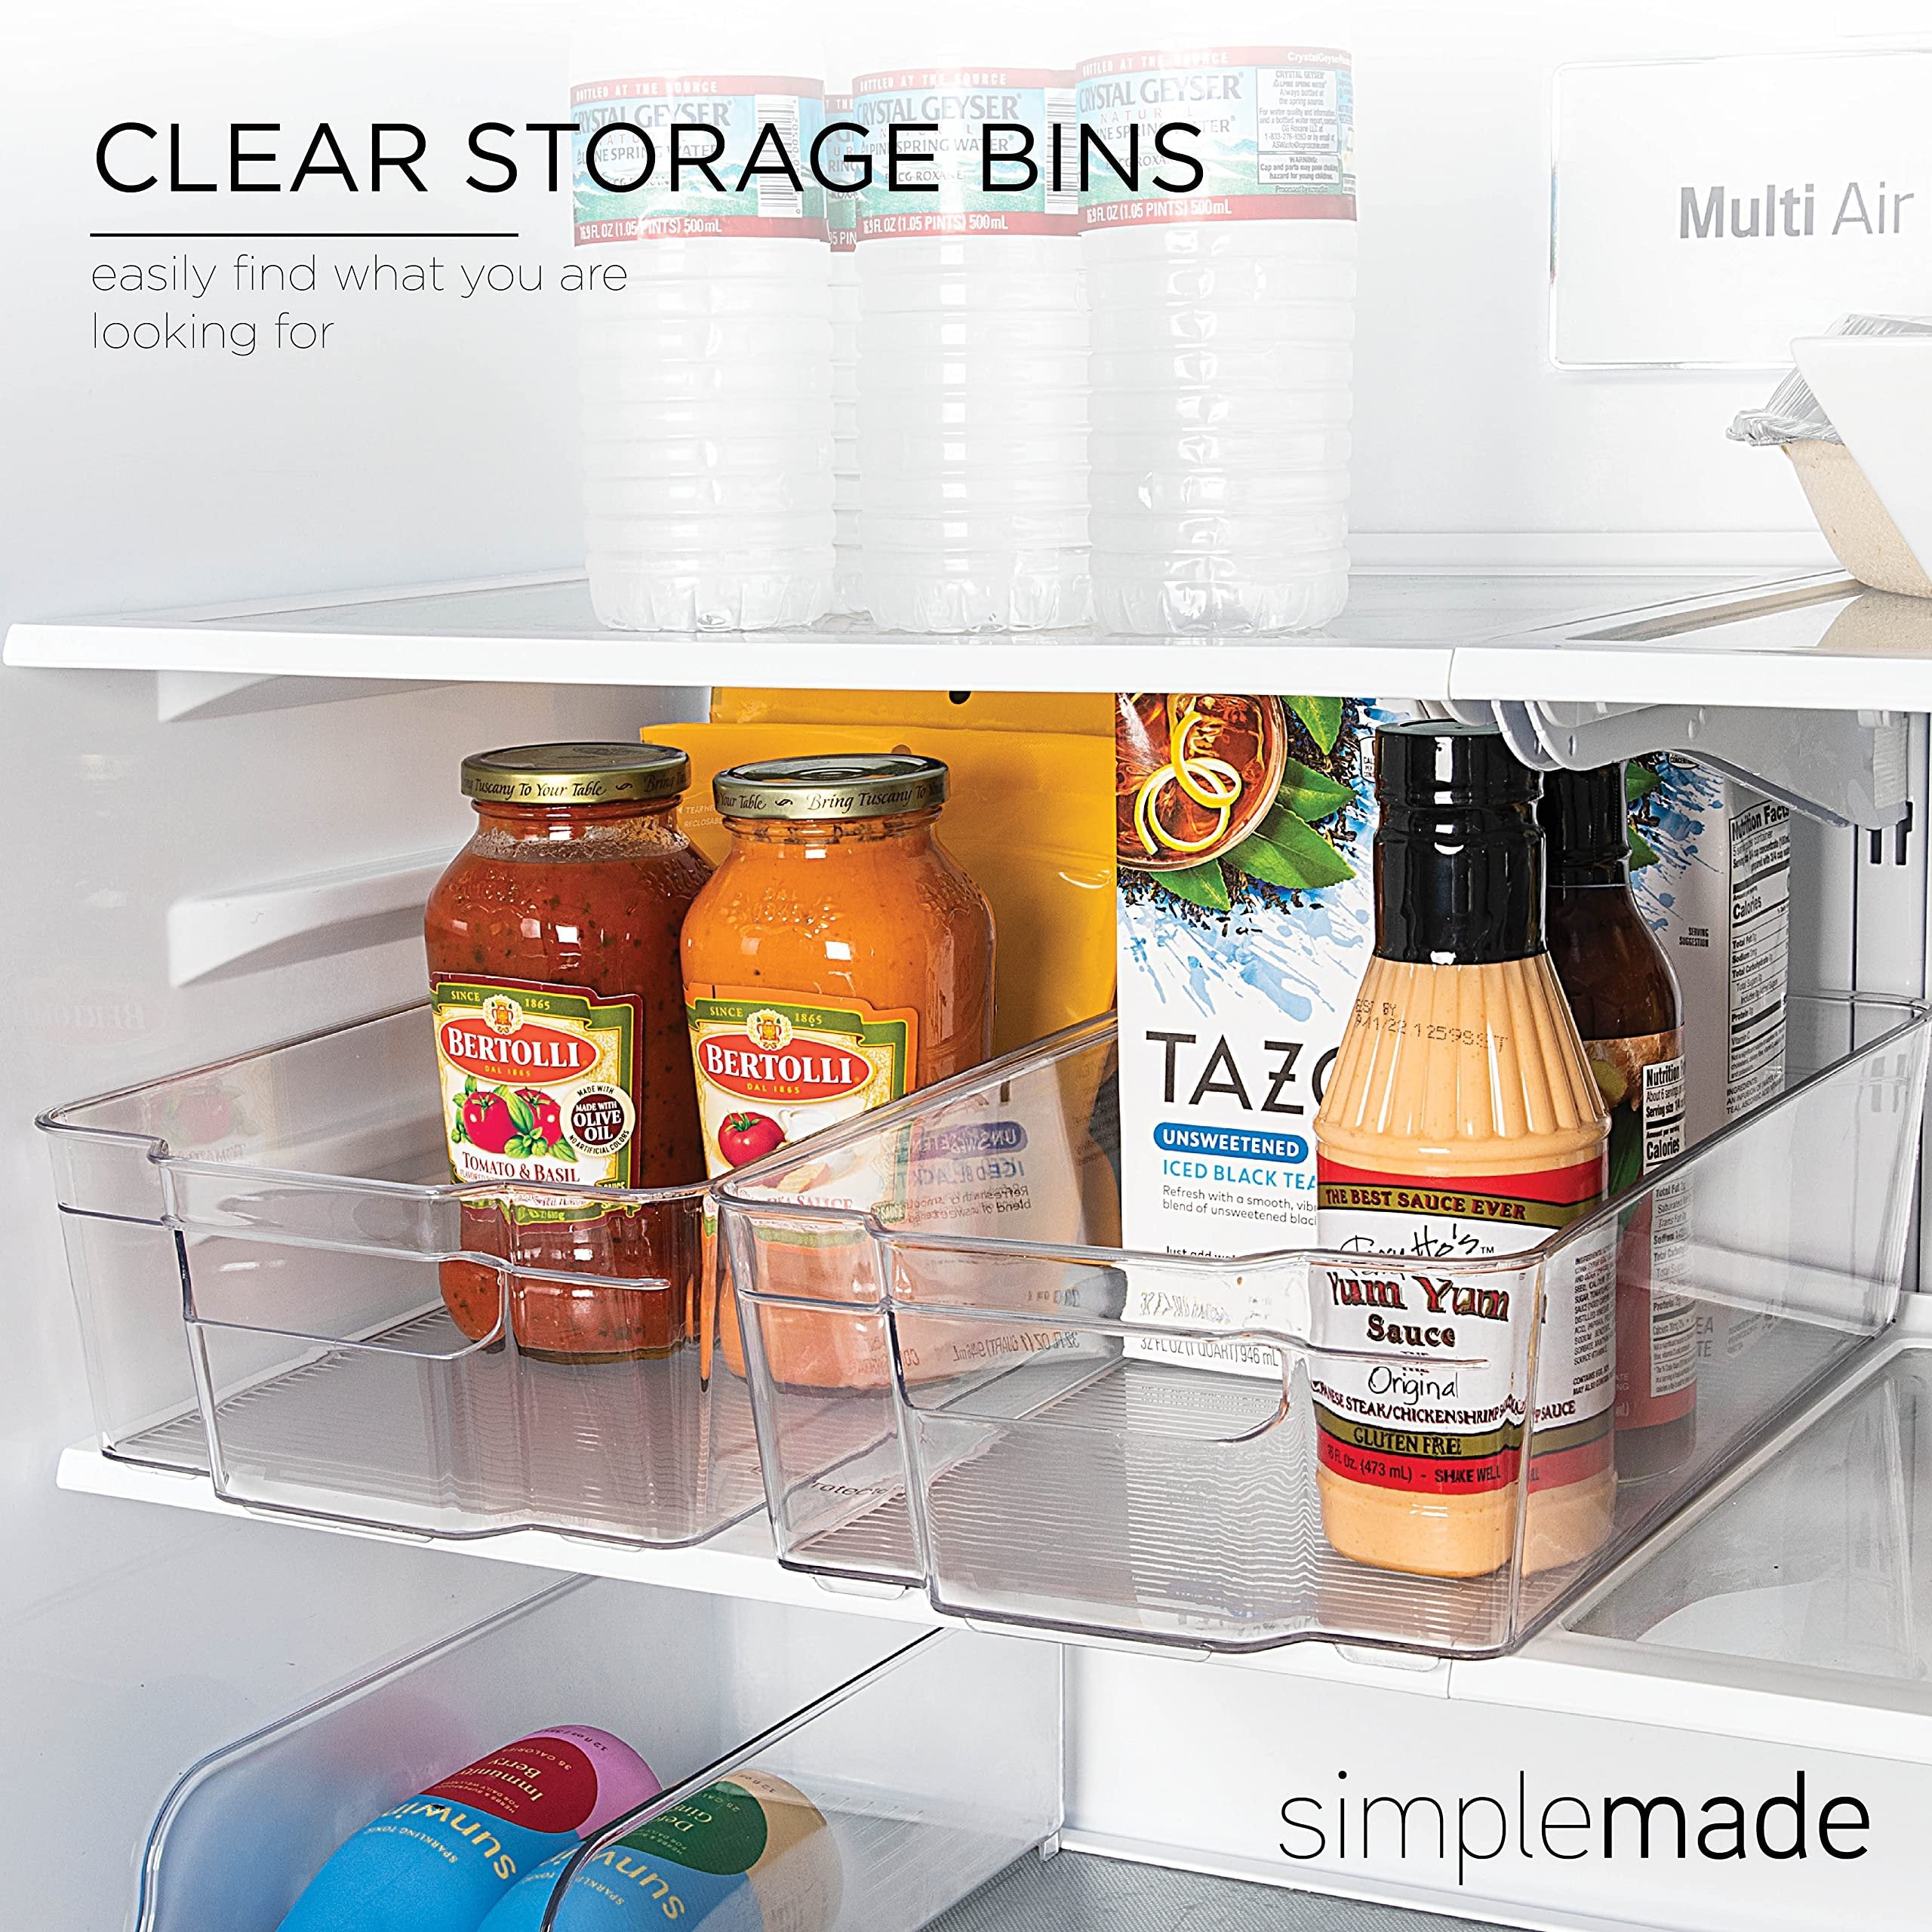 SIMPLEMADE Clear Refrigerator Organizer Bins - Set of 2 XL Sized (8.5" x 14.6") Clear Bins for Fridge, Containers for Fridge and Freezer, Multipurpose Storage for Kitchen, Office, Bathroom